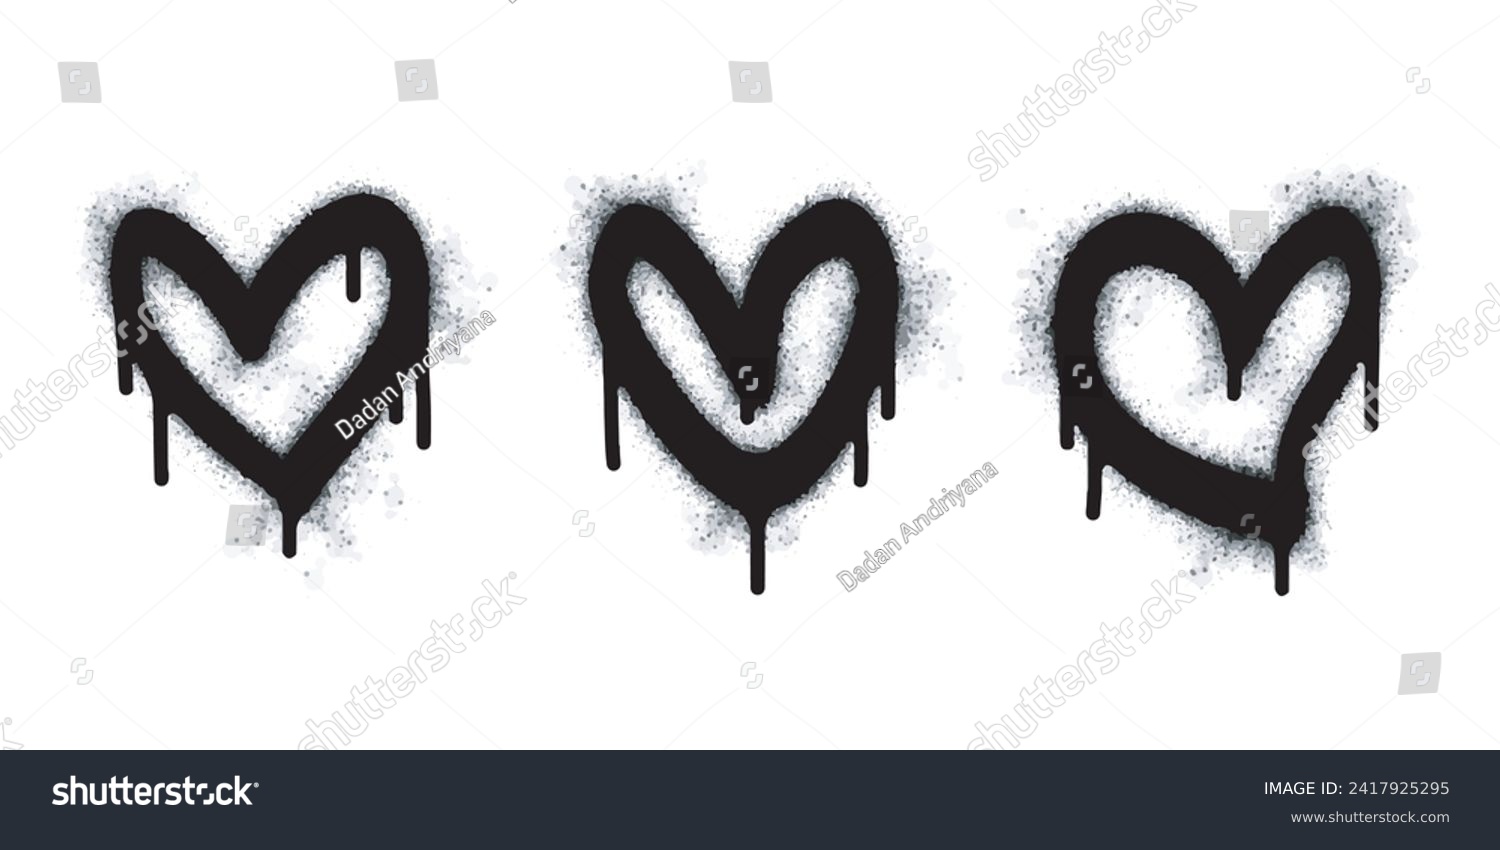 SVG of Spray graffiti heart sign painted in black on white. Love heart drop symbol. isolated on a white background. vector illustration svg